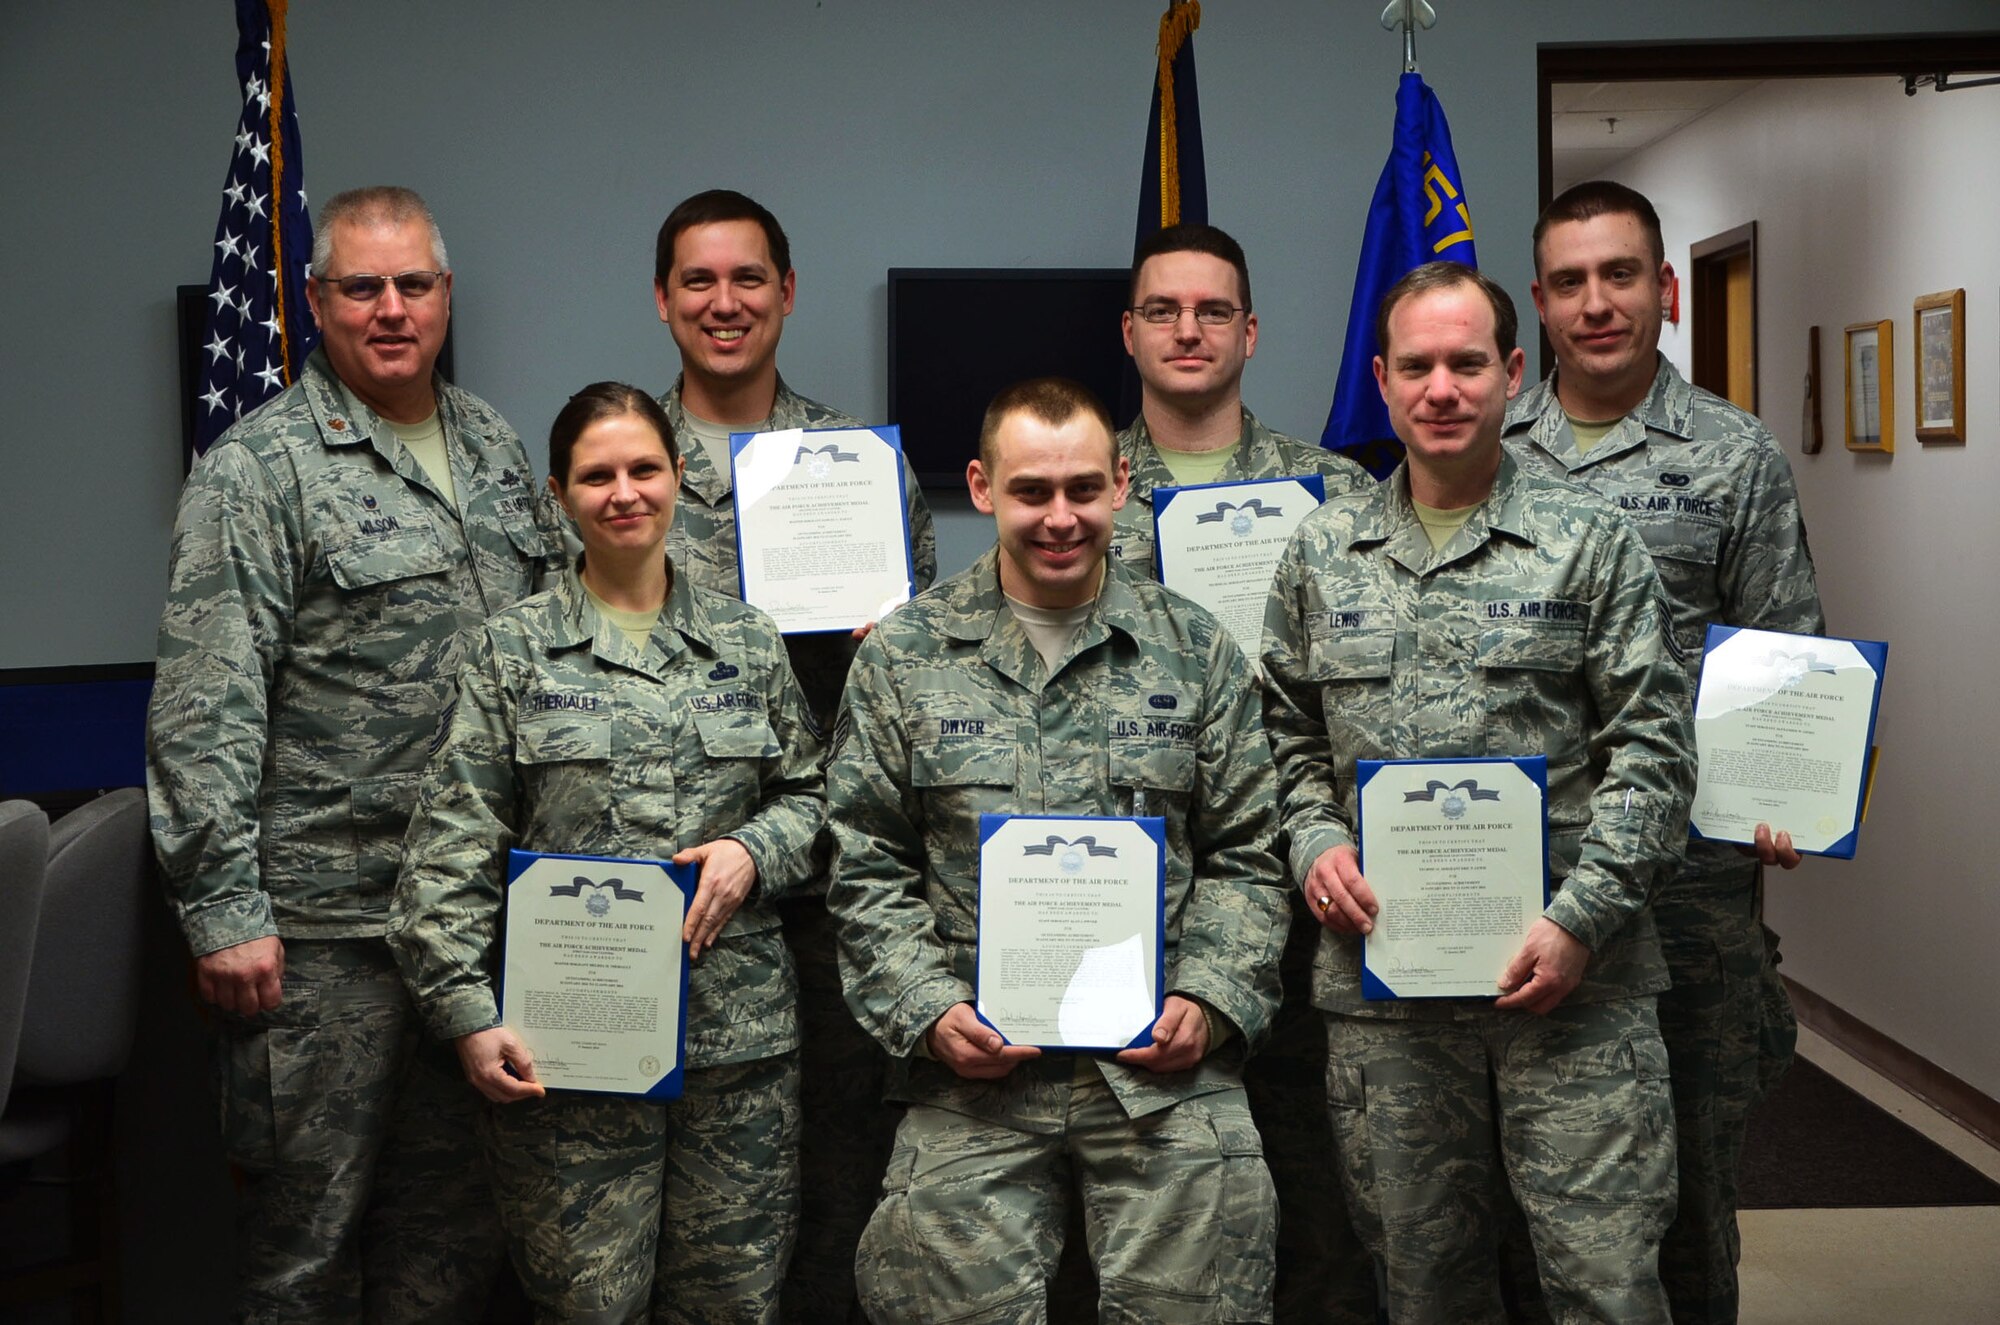 Six Airmen from the 157th Communications Flight were presented with achievement medals for their performance during a power outage experienced during the January unit training assembly, Pease Air National Guard Base, N.H. (U.S. Air National Guard photo by Senior Airman Kayla McWalter)